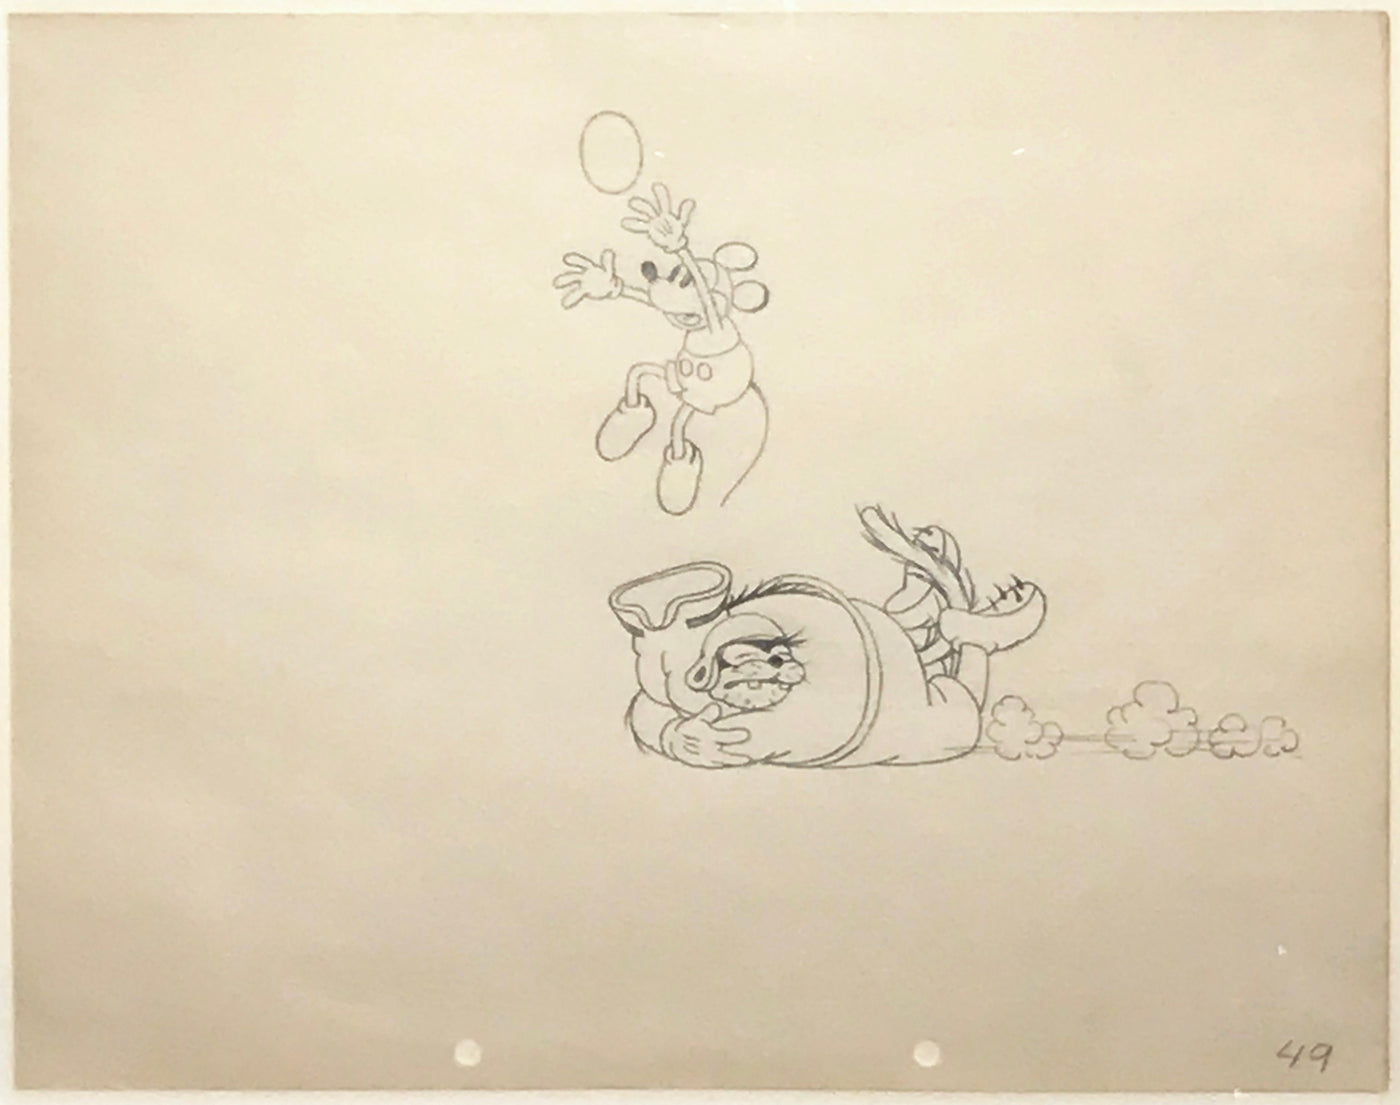 Original Walt Disney Production Drawing from Touchdown Mickey (1932) featuring Mickey Mouse and Pegleg Pete